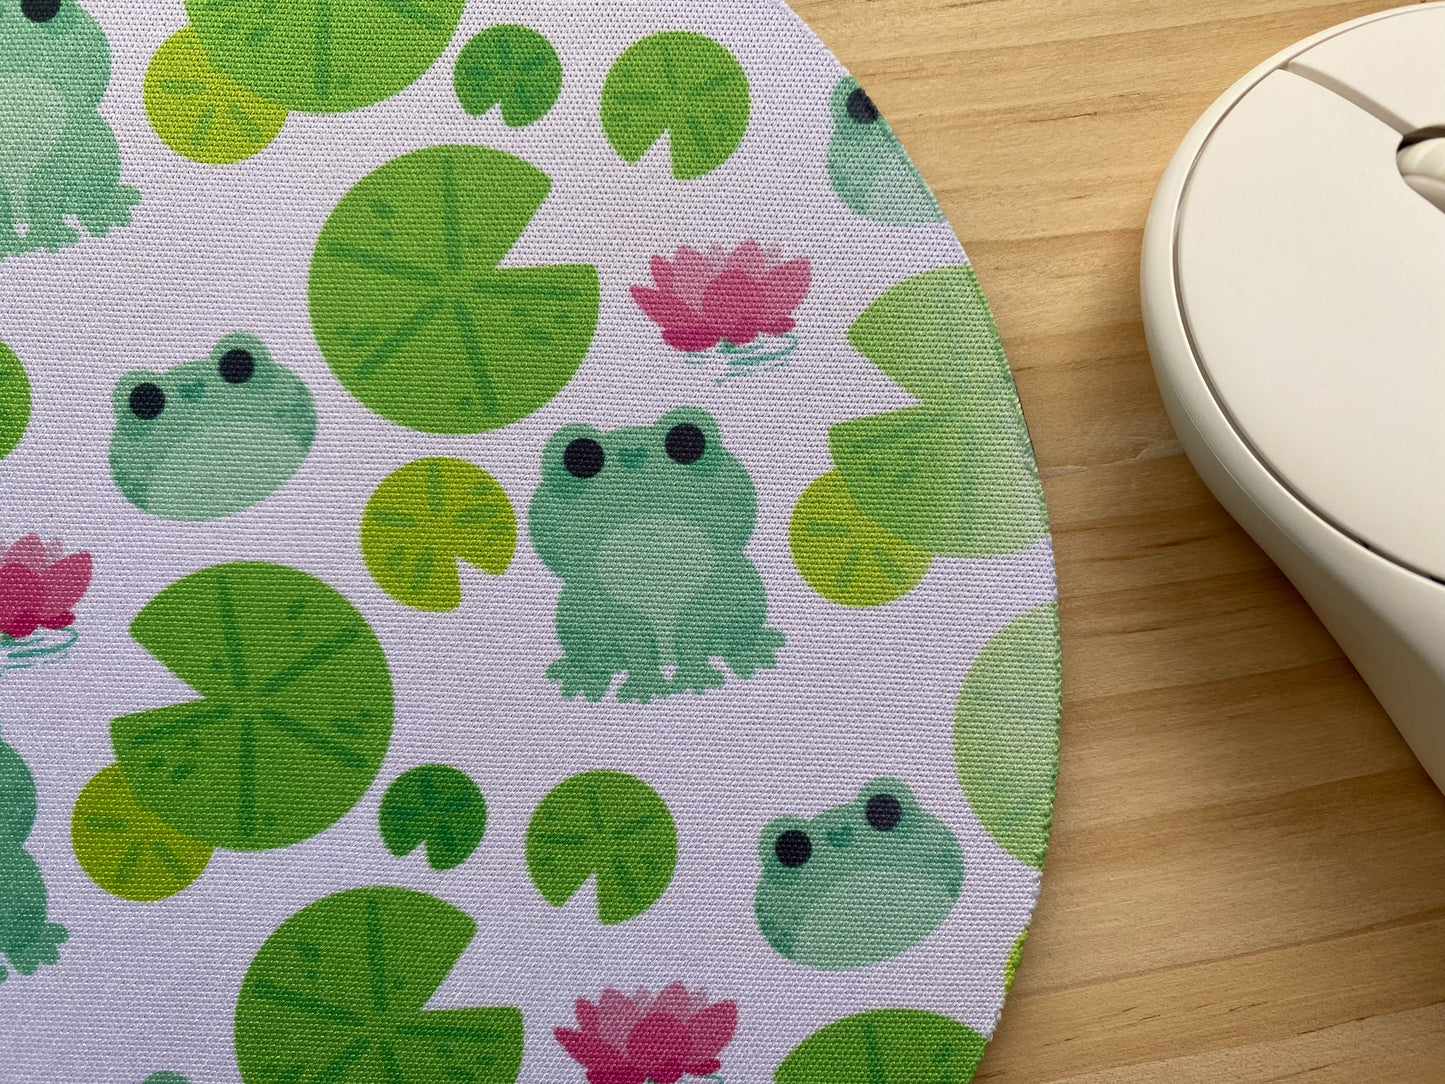 SECONDS Froggy Mousepad | Neoprene Mouse Mat